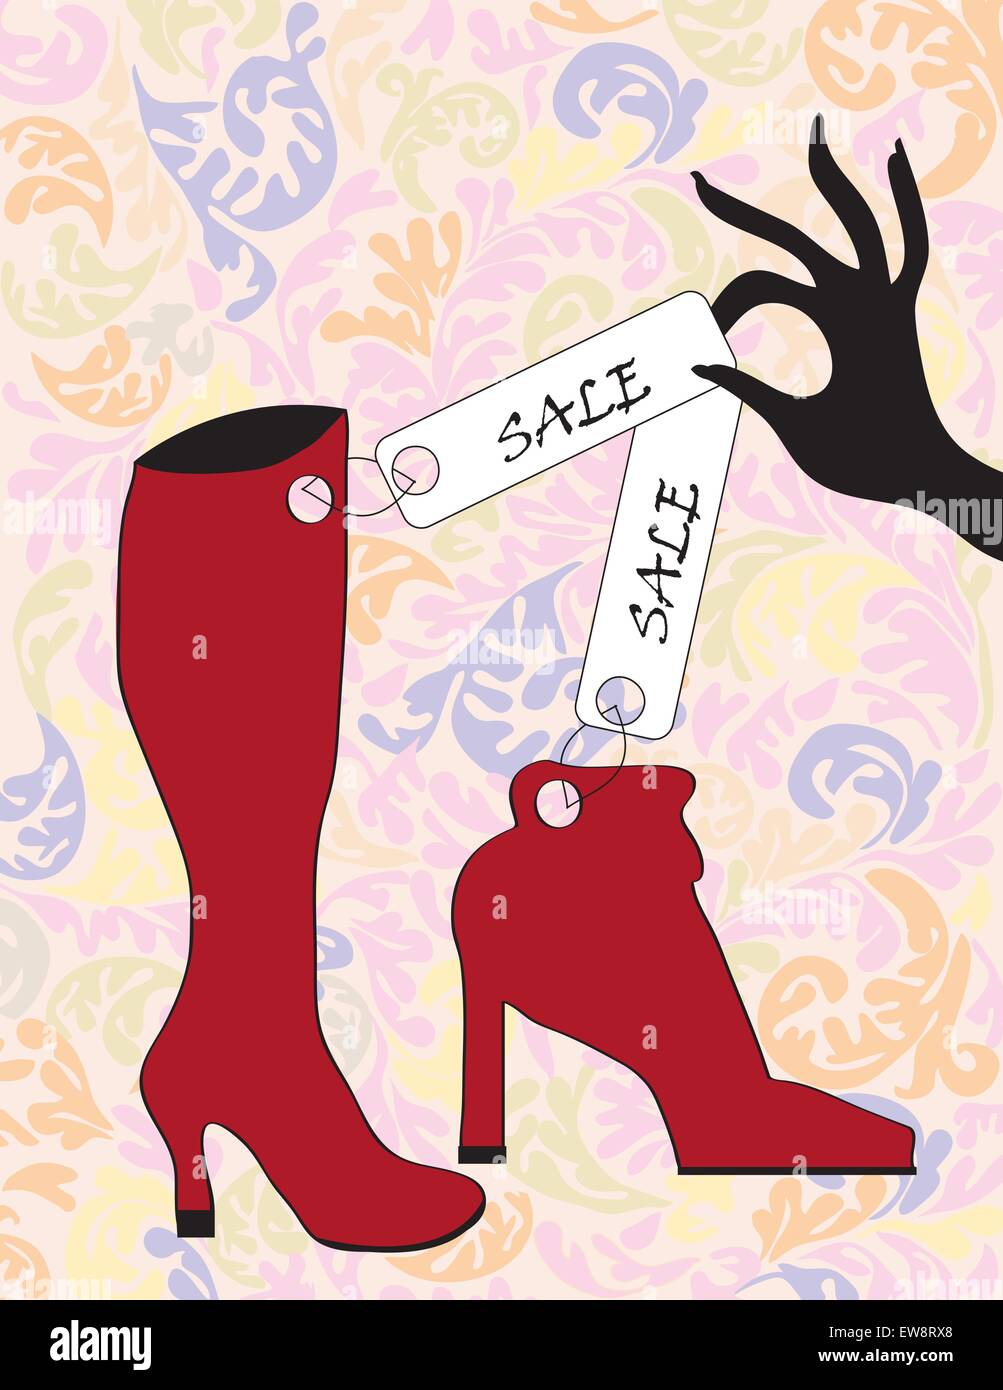 Vintage shoes sale sign with ornate elegant retro floral design, red shoe and boot. Vector illustration. Stock Vector